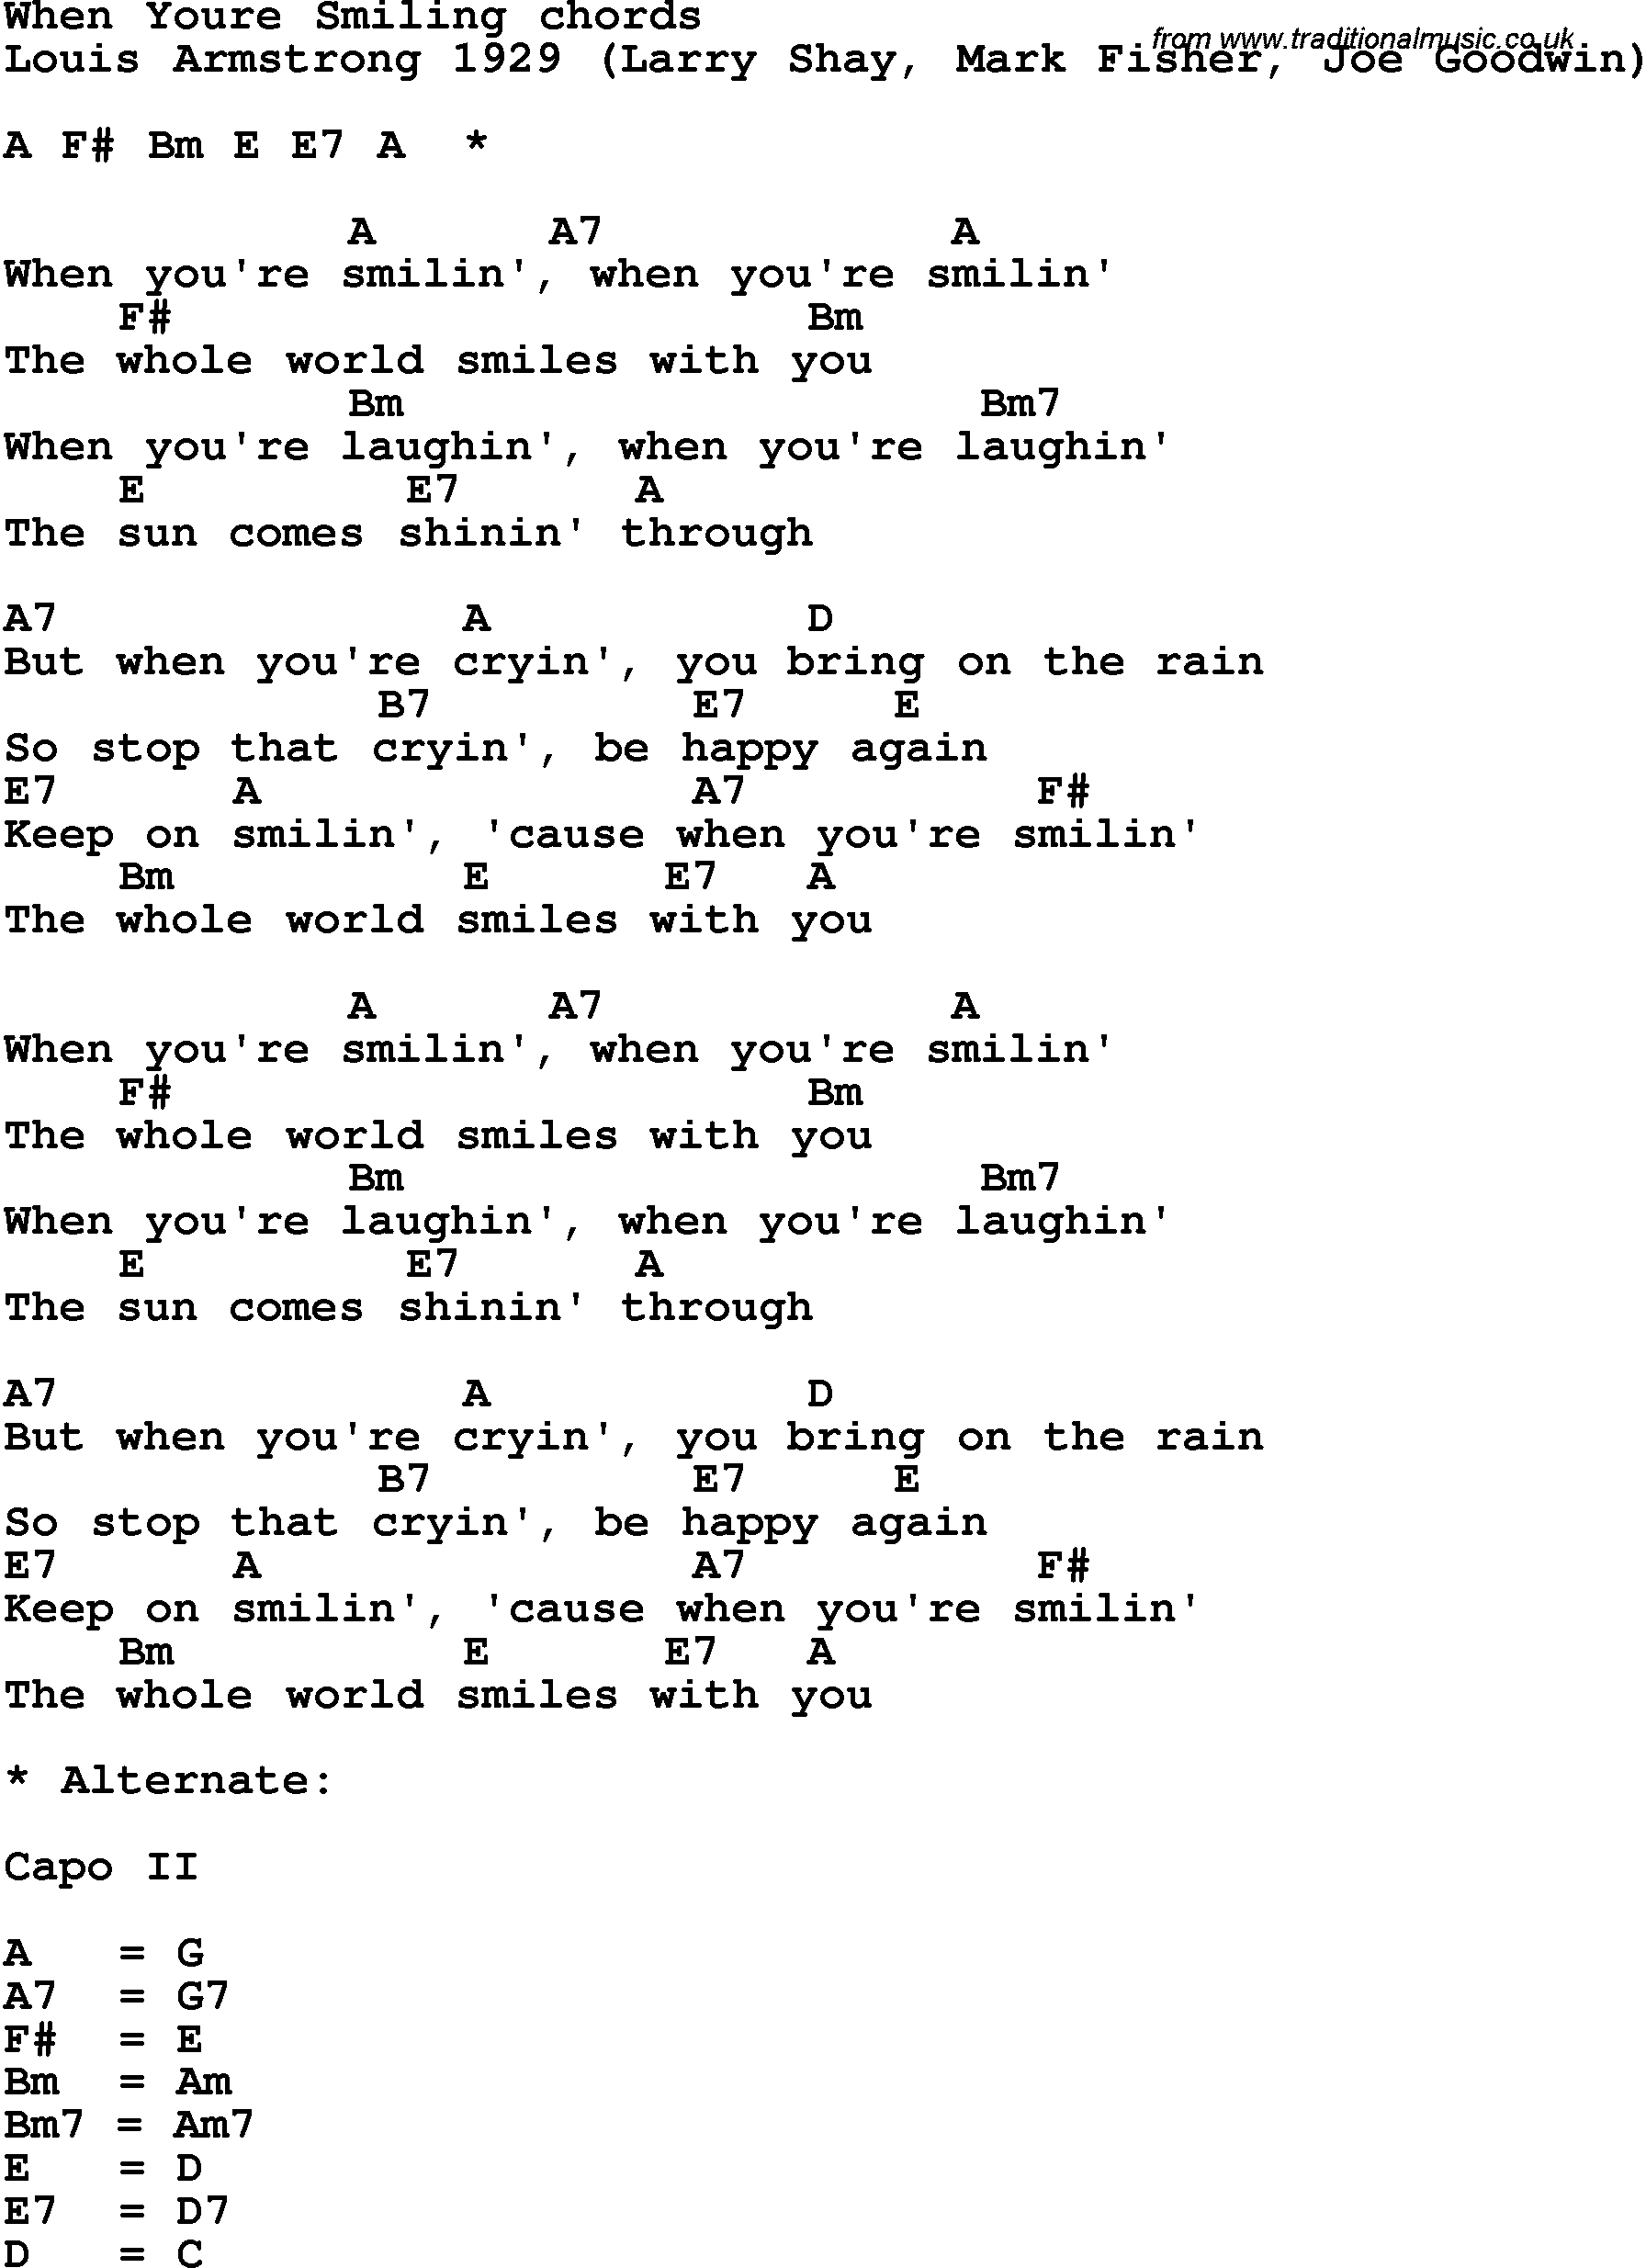 Song Lyrics with guitar chords for When You're Smiling